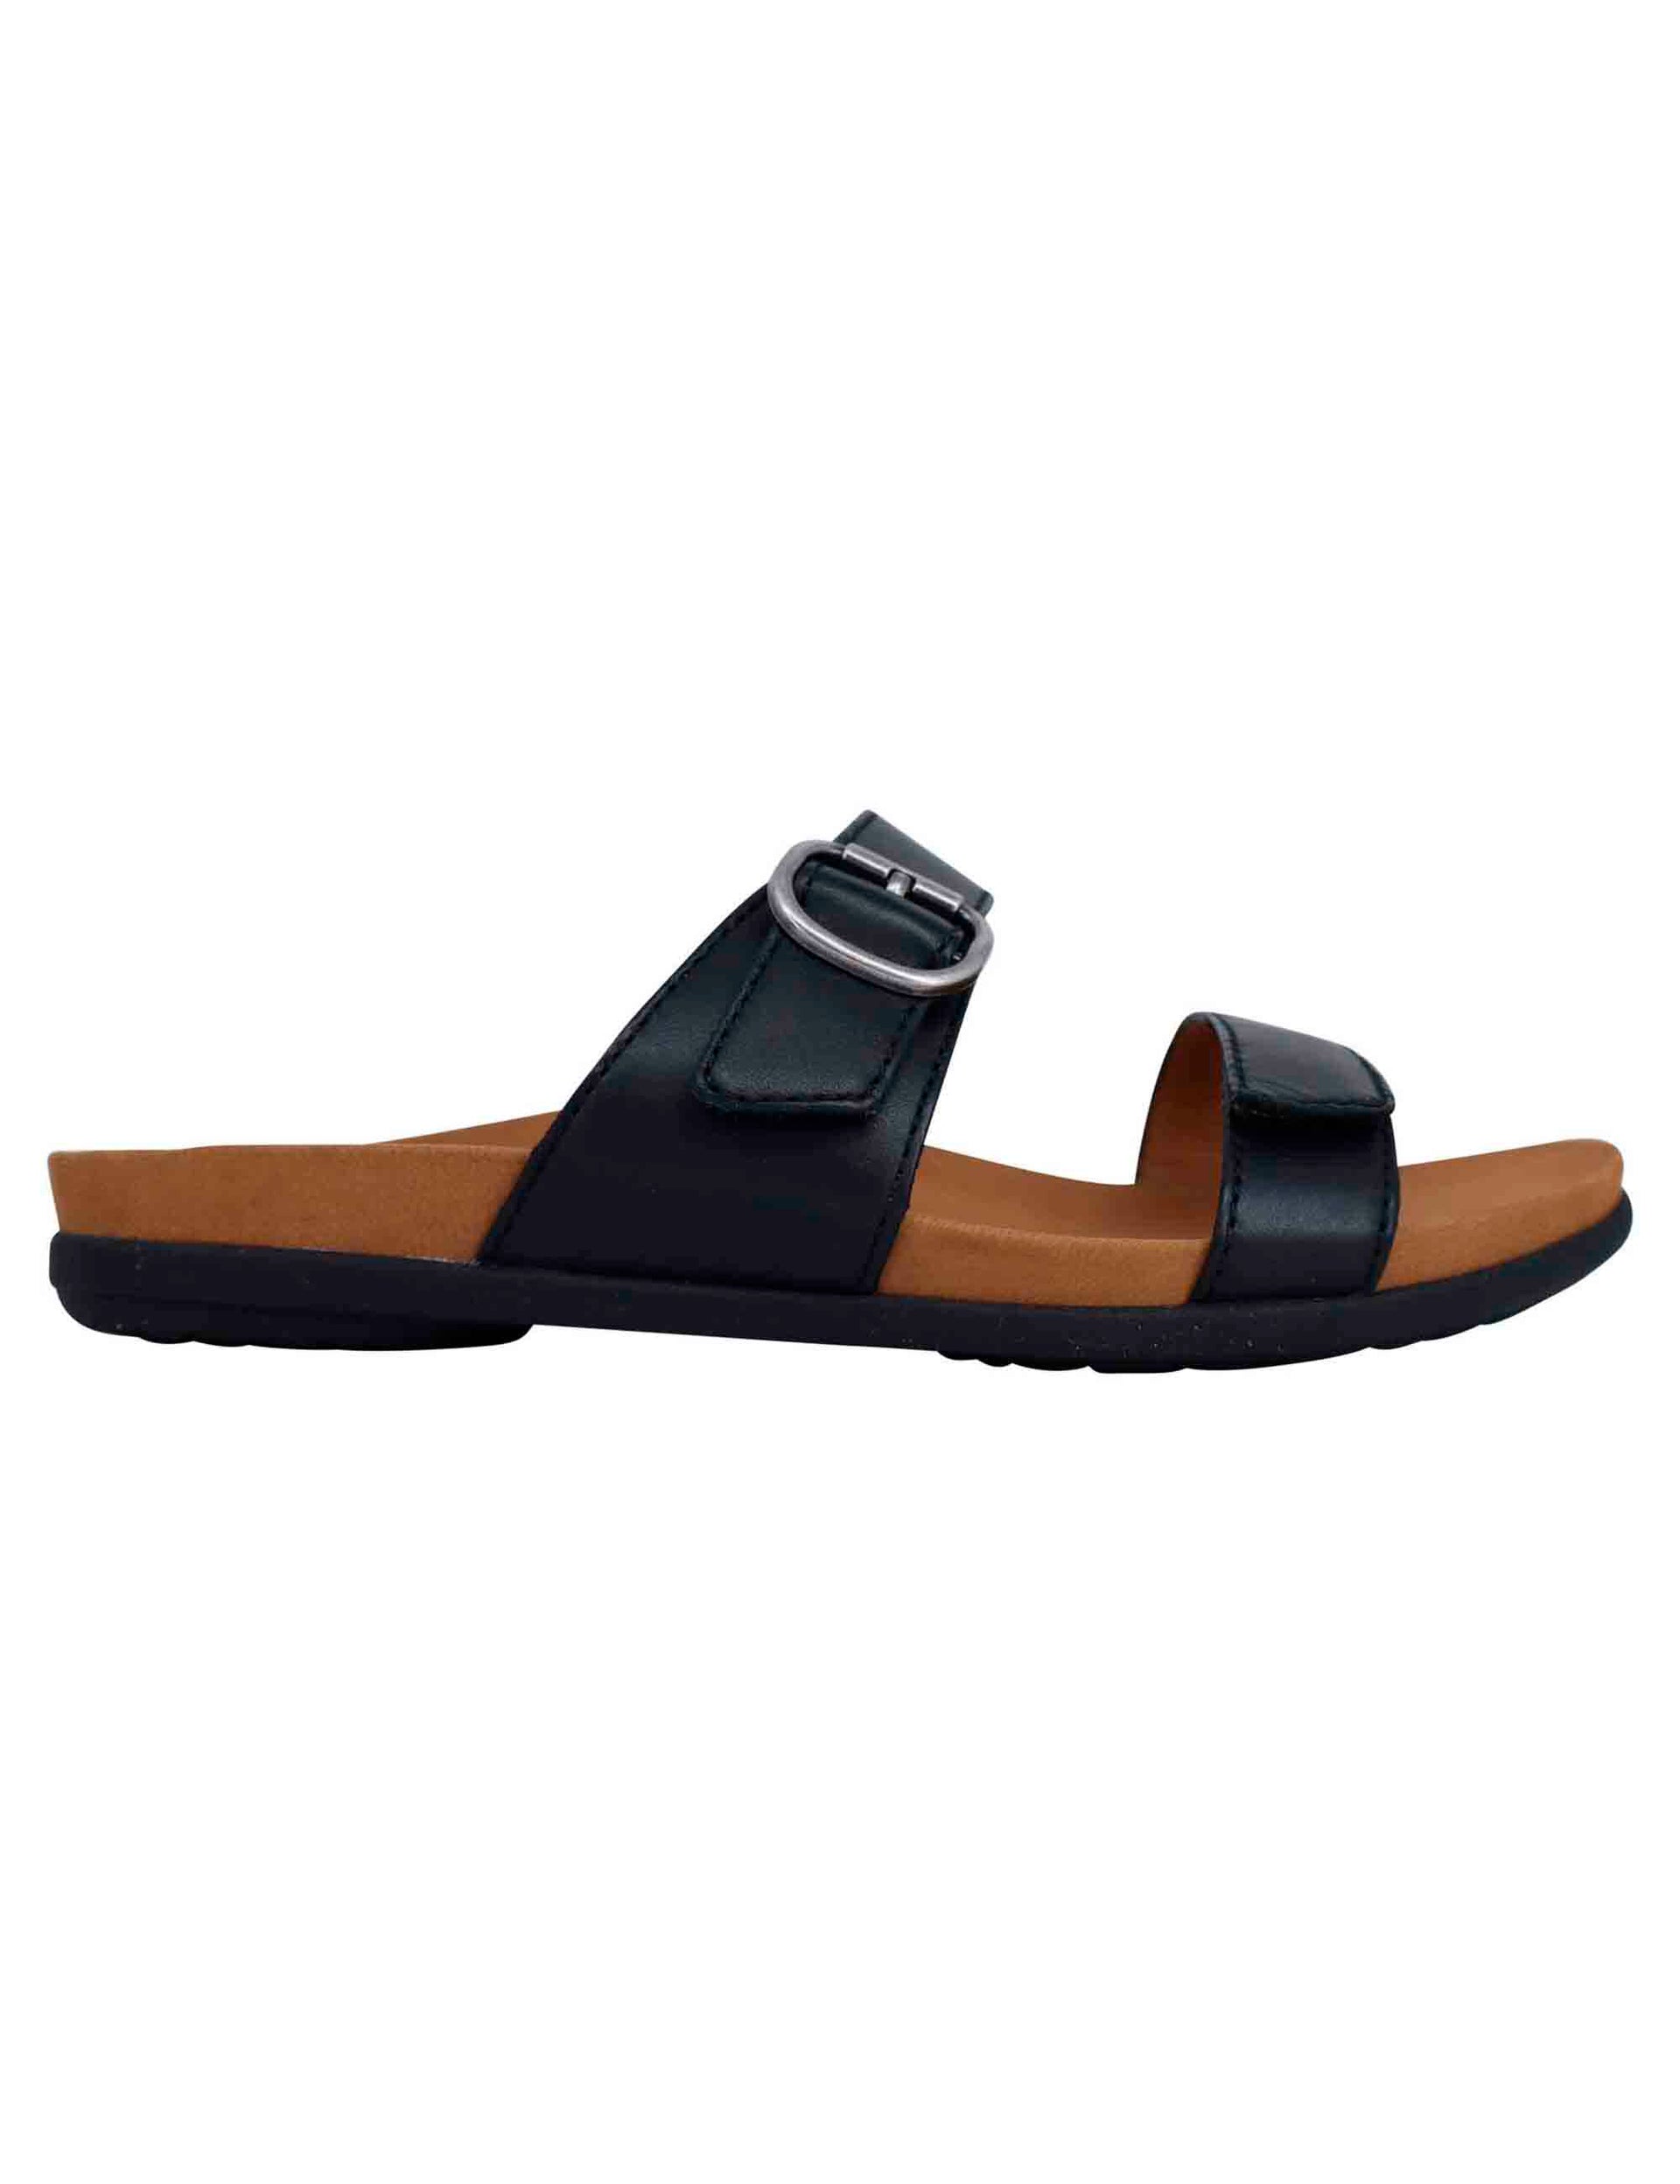 Women's flat sandals in black leather with side buckle